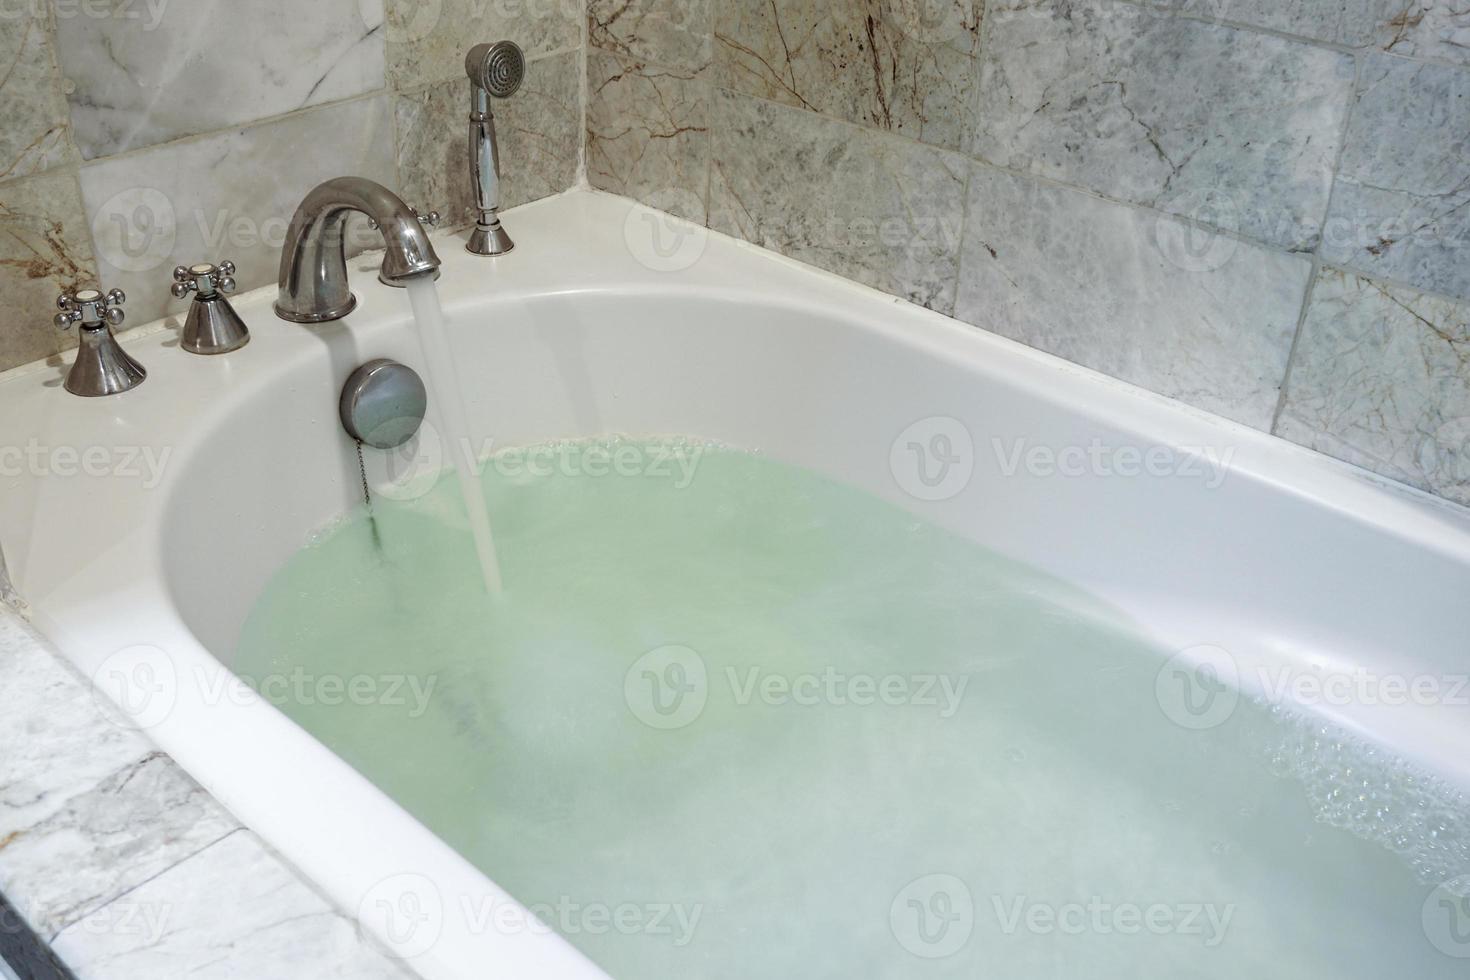 Stainless Faucet with a white bathtub that long large container filled with water in the bathroom decor with marble tile. photo